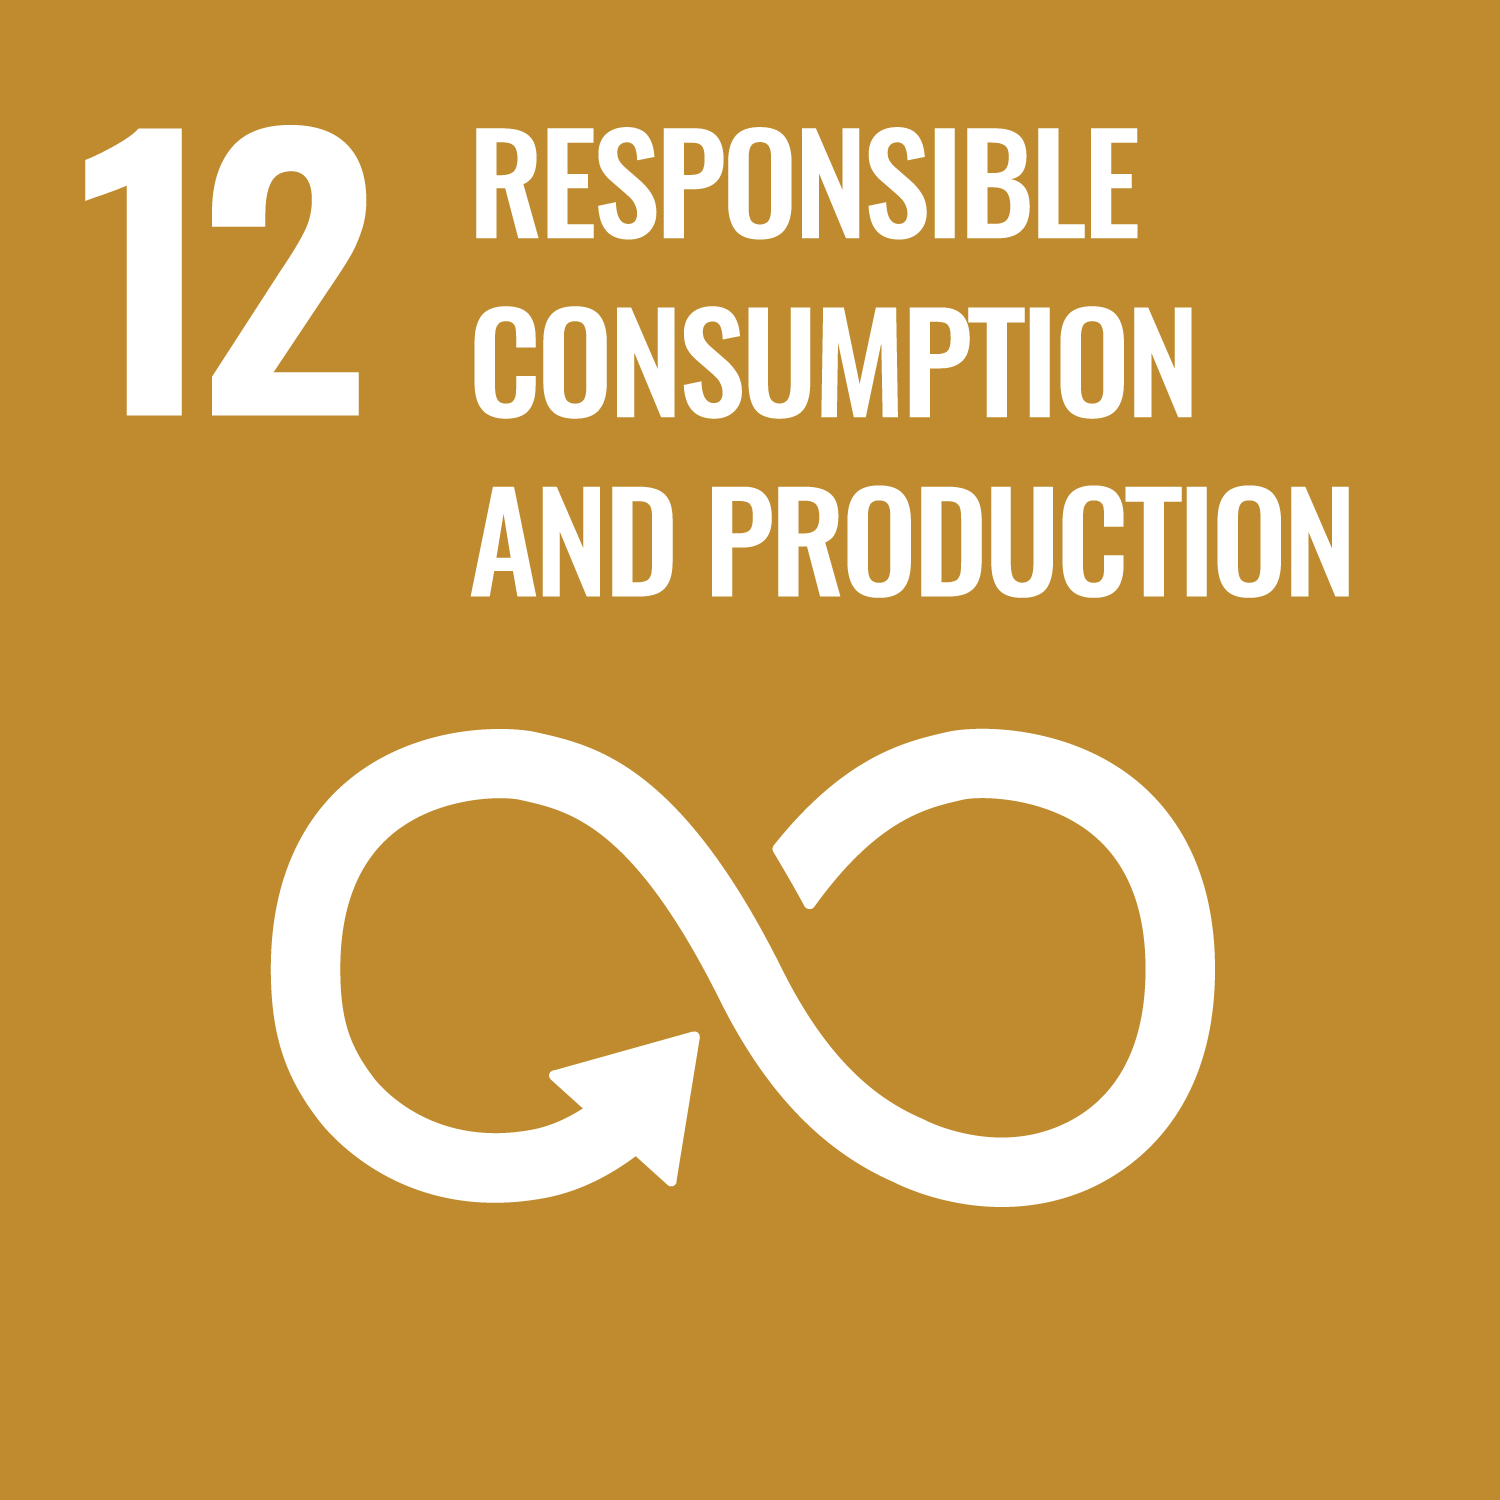 UN sustainable development goal number 12 Responsible consumtion and production. Link to goal number 12.